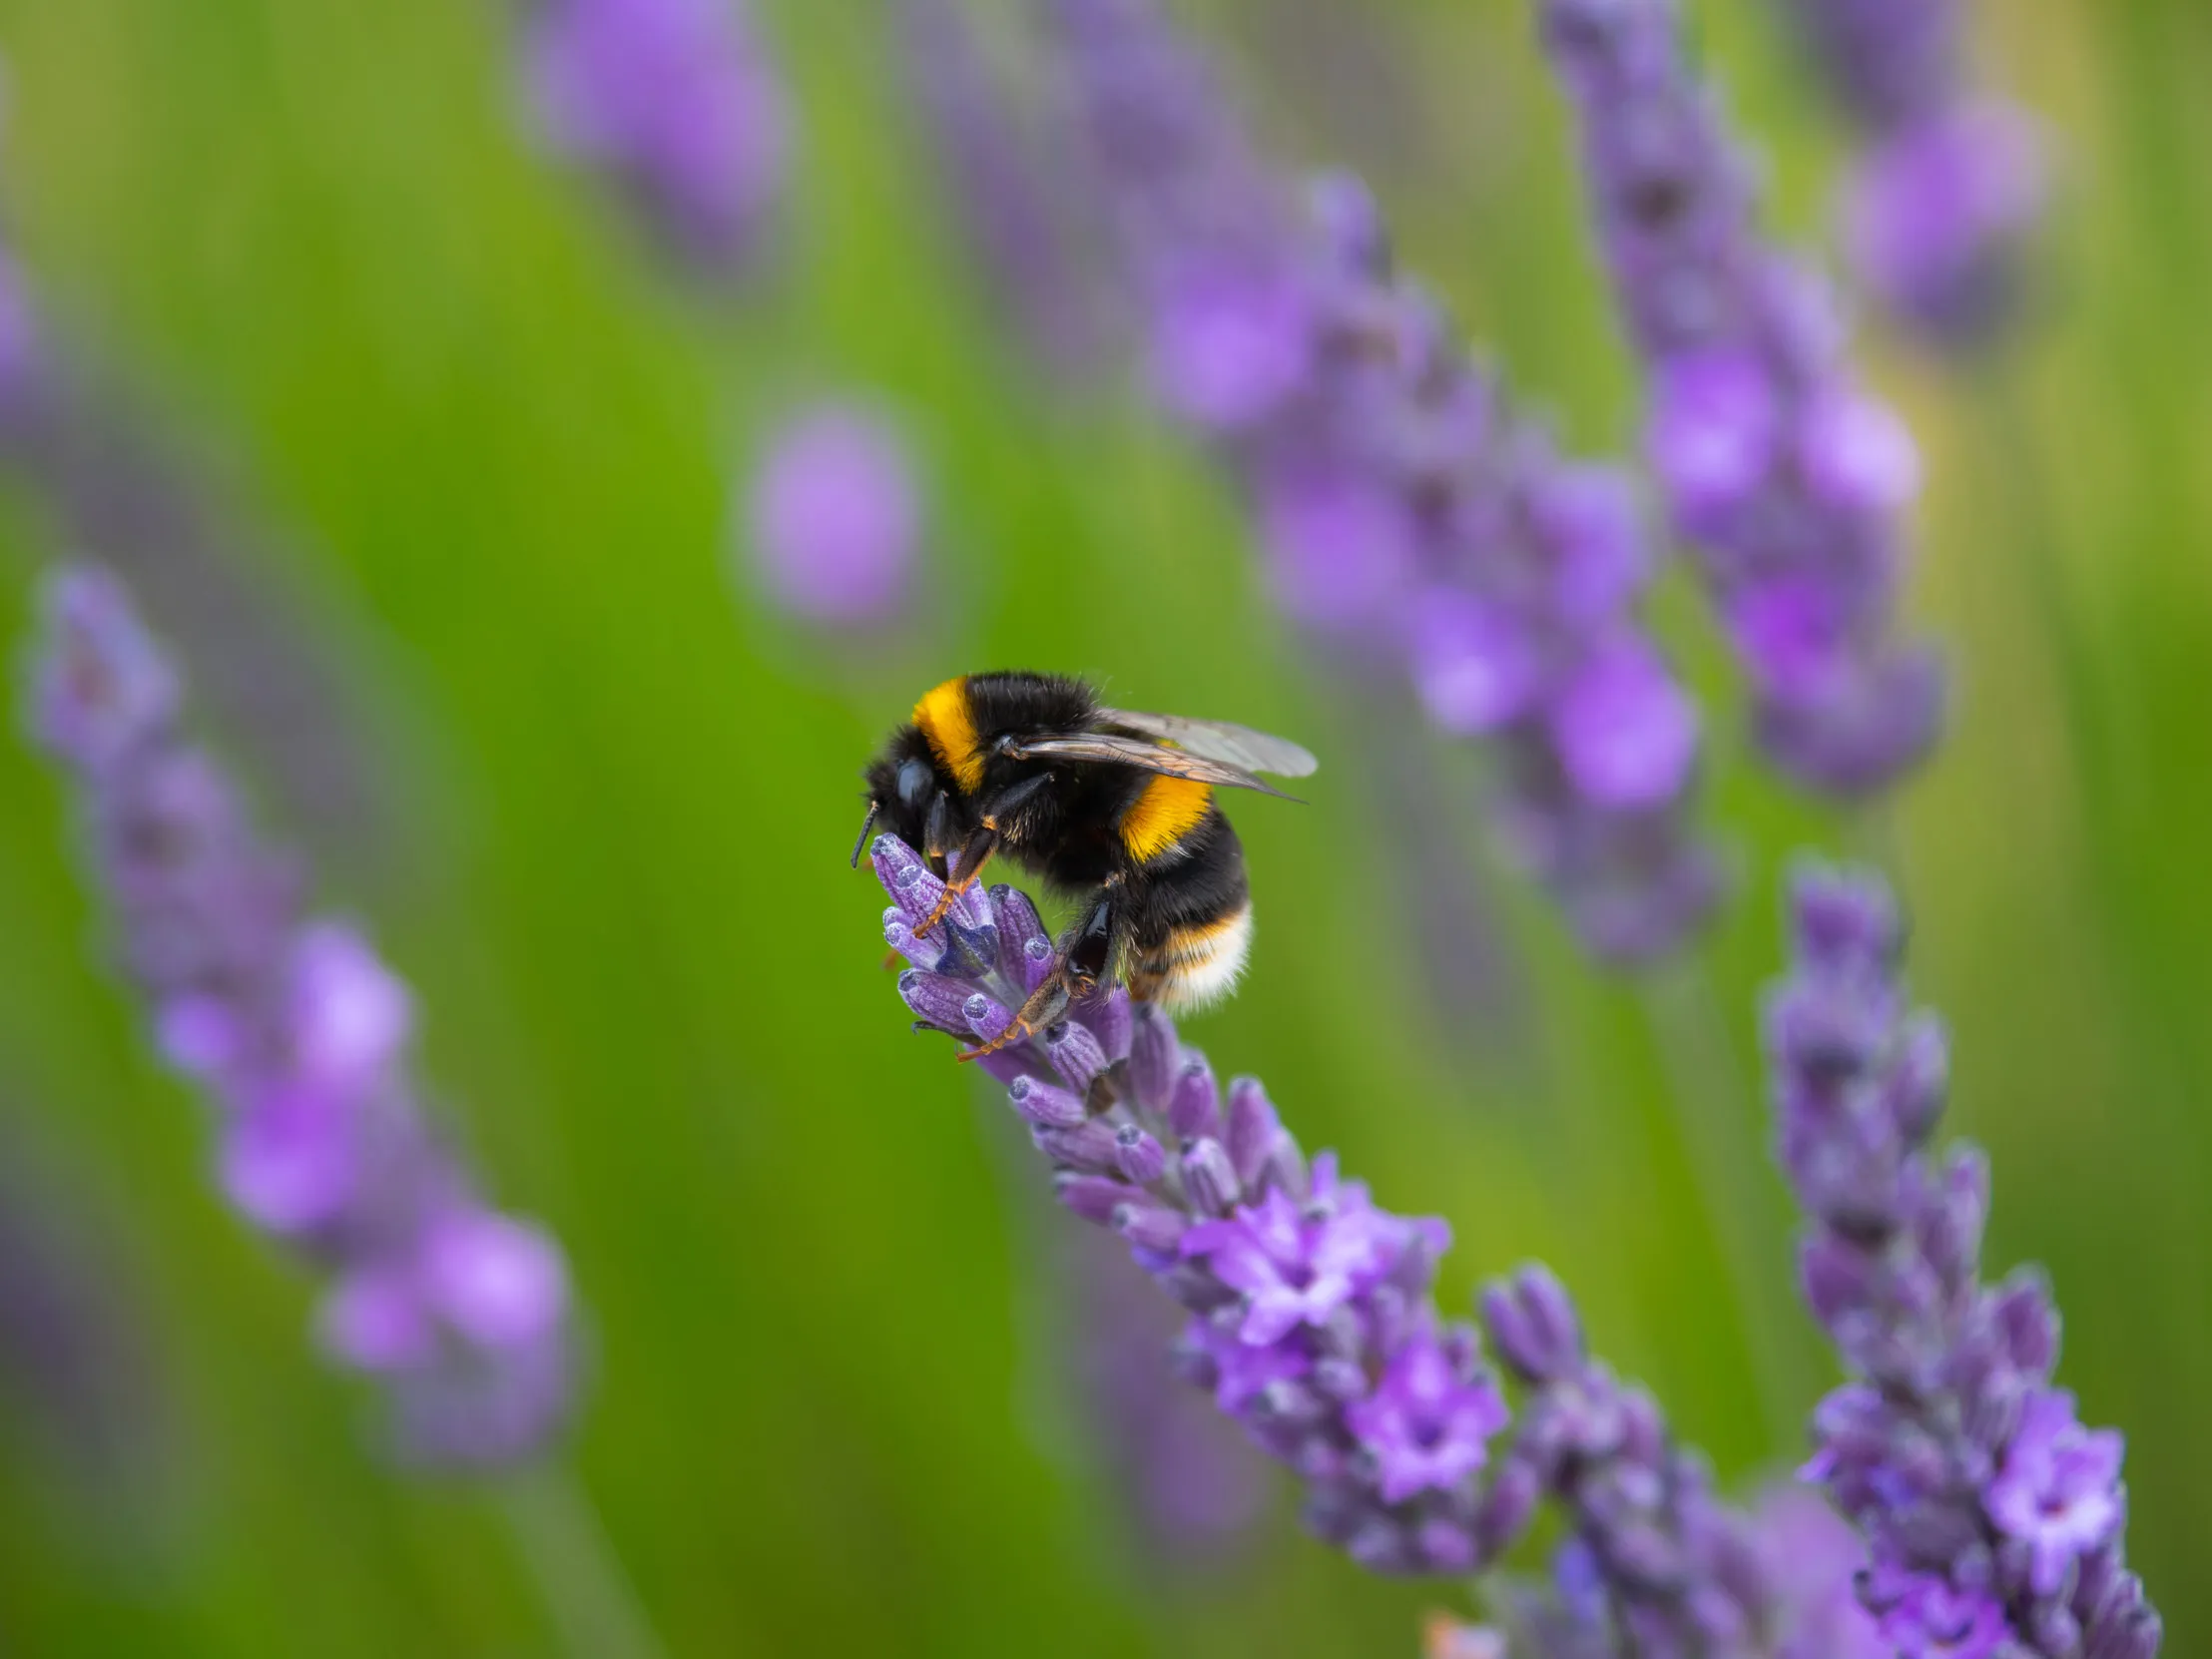 A White-tailed Bumblebee perched on the top of some summer lavender.